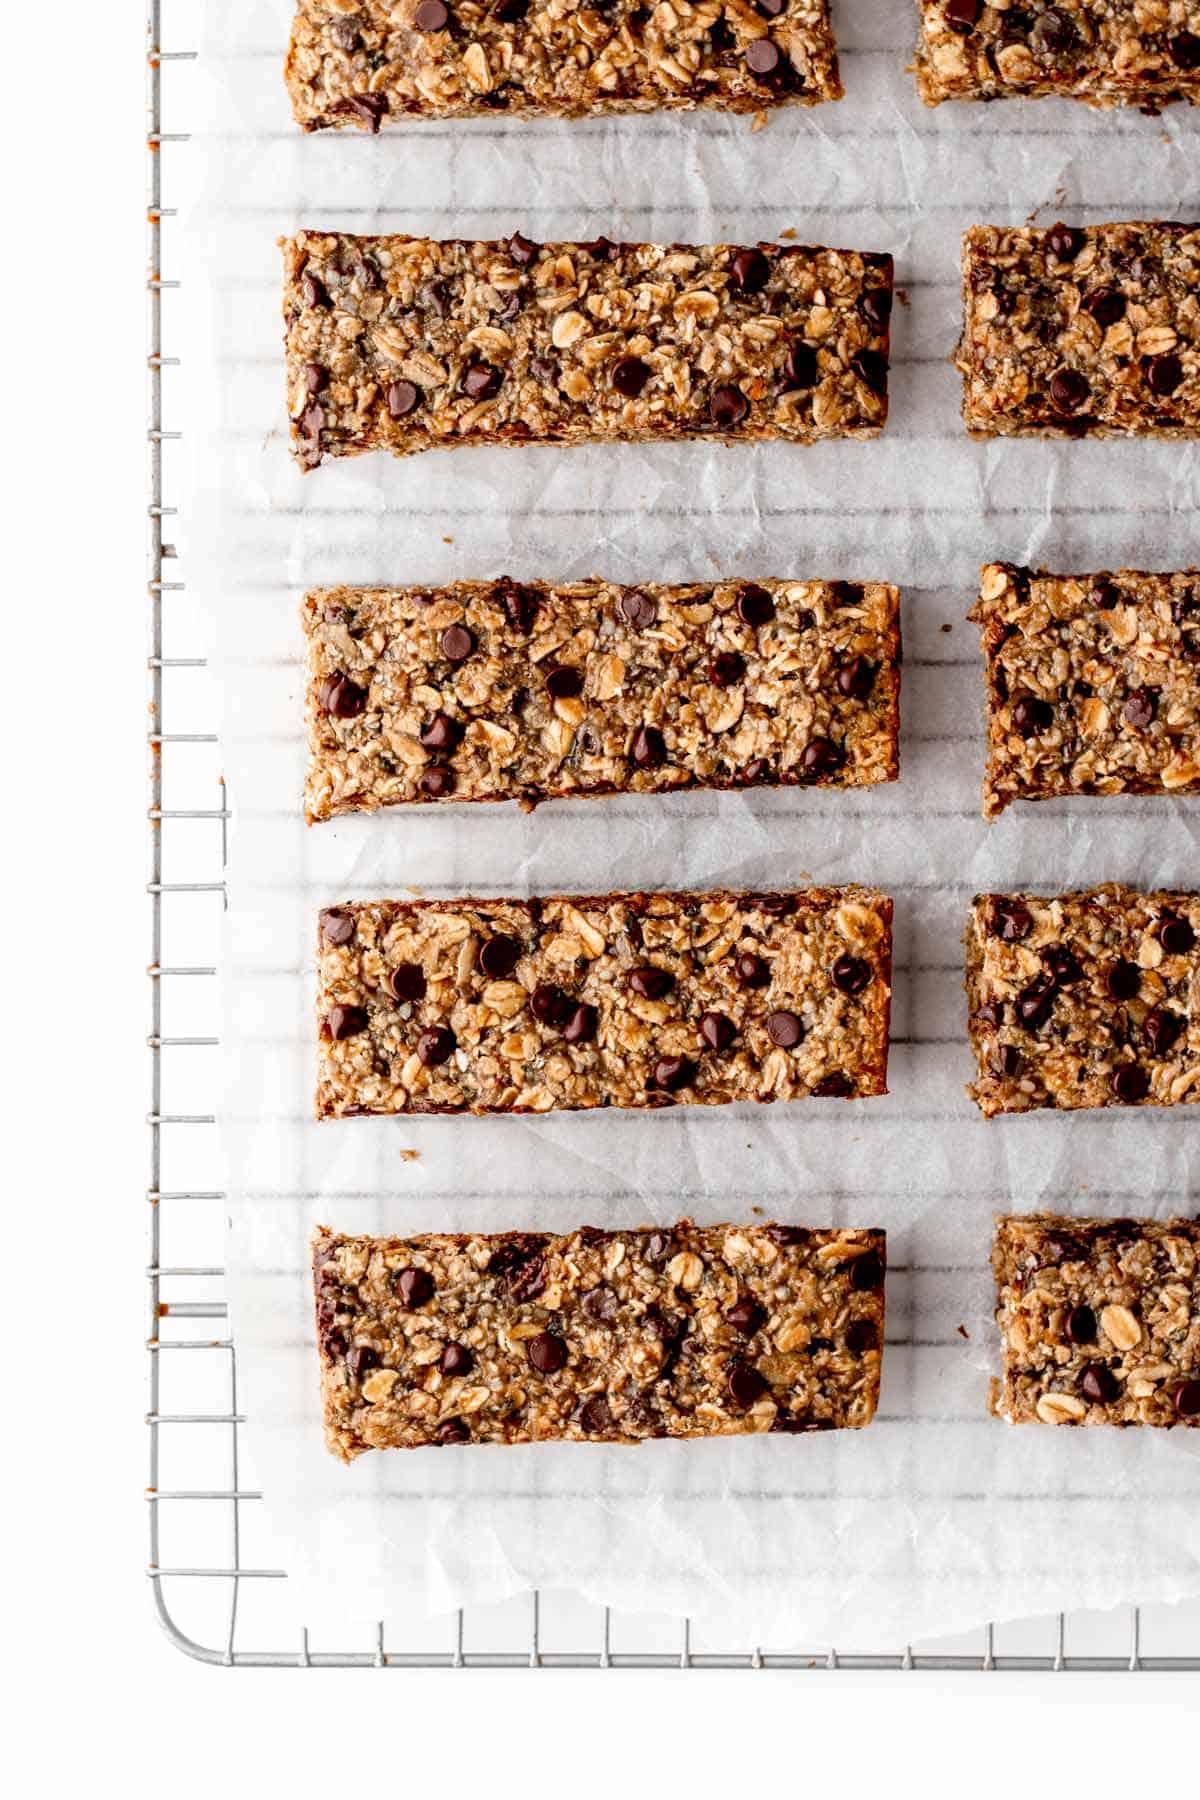 Nut free granola bars on a cooling rack lined with parchment paper.